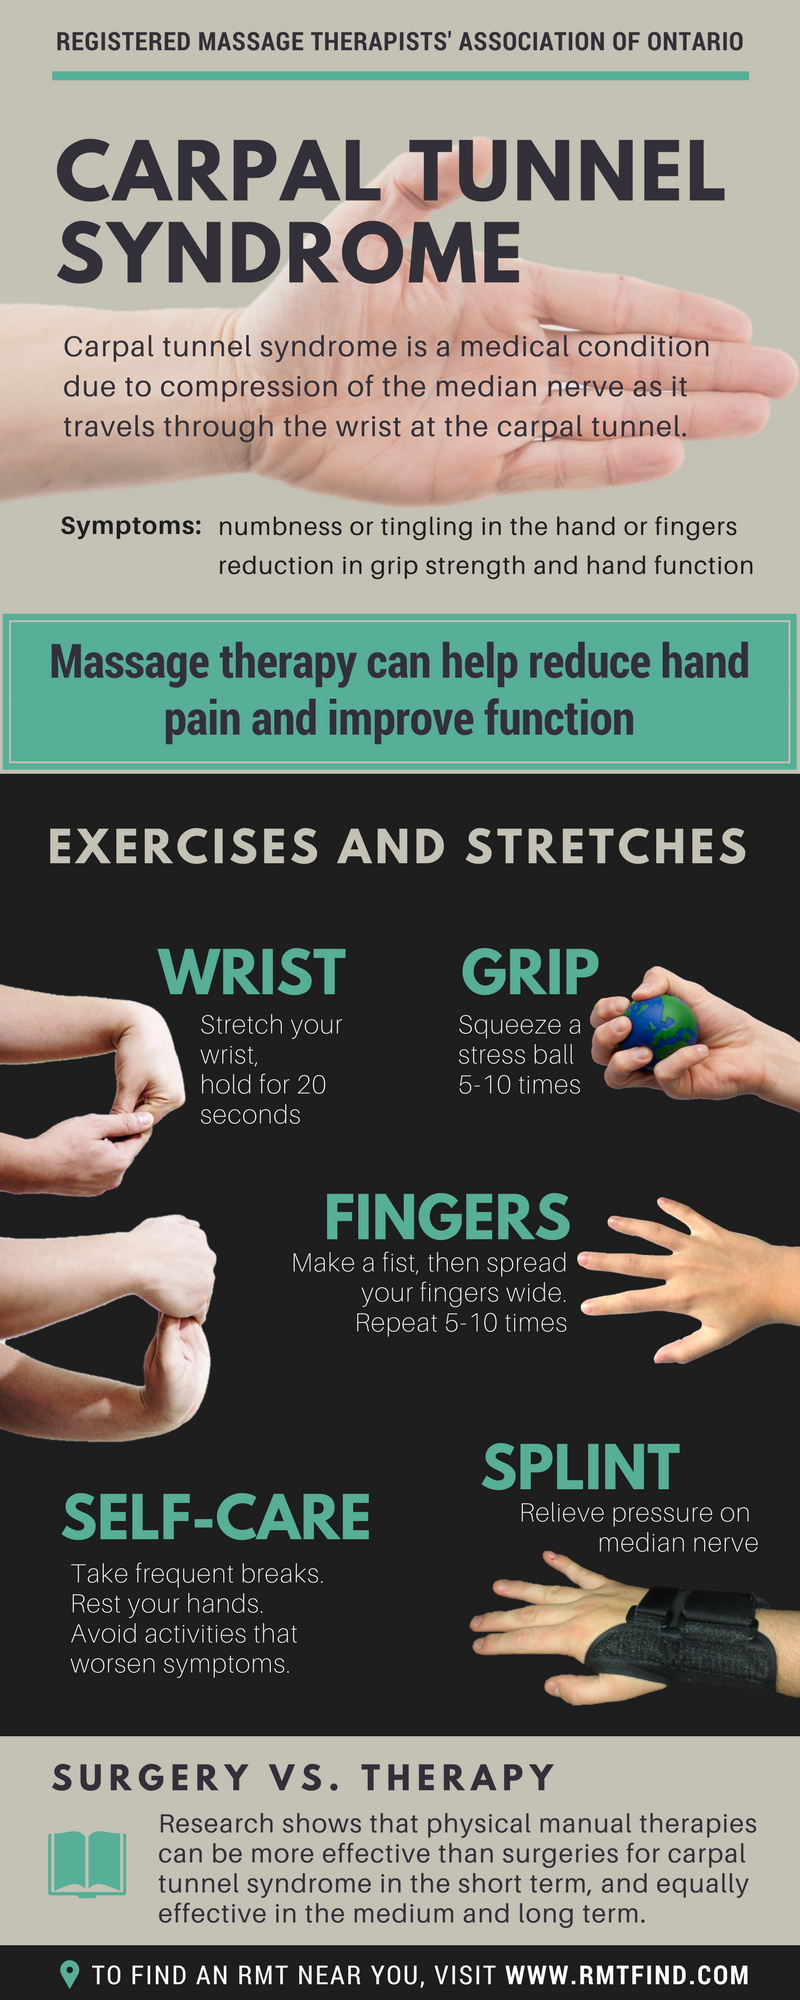 https://www.rmtao.com/Media/Default/Blog%20Images/Massage%20Therapy%20for%20Carpal%20Tunnel%20Syndrome.png